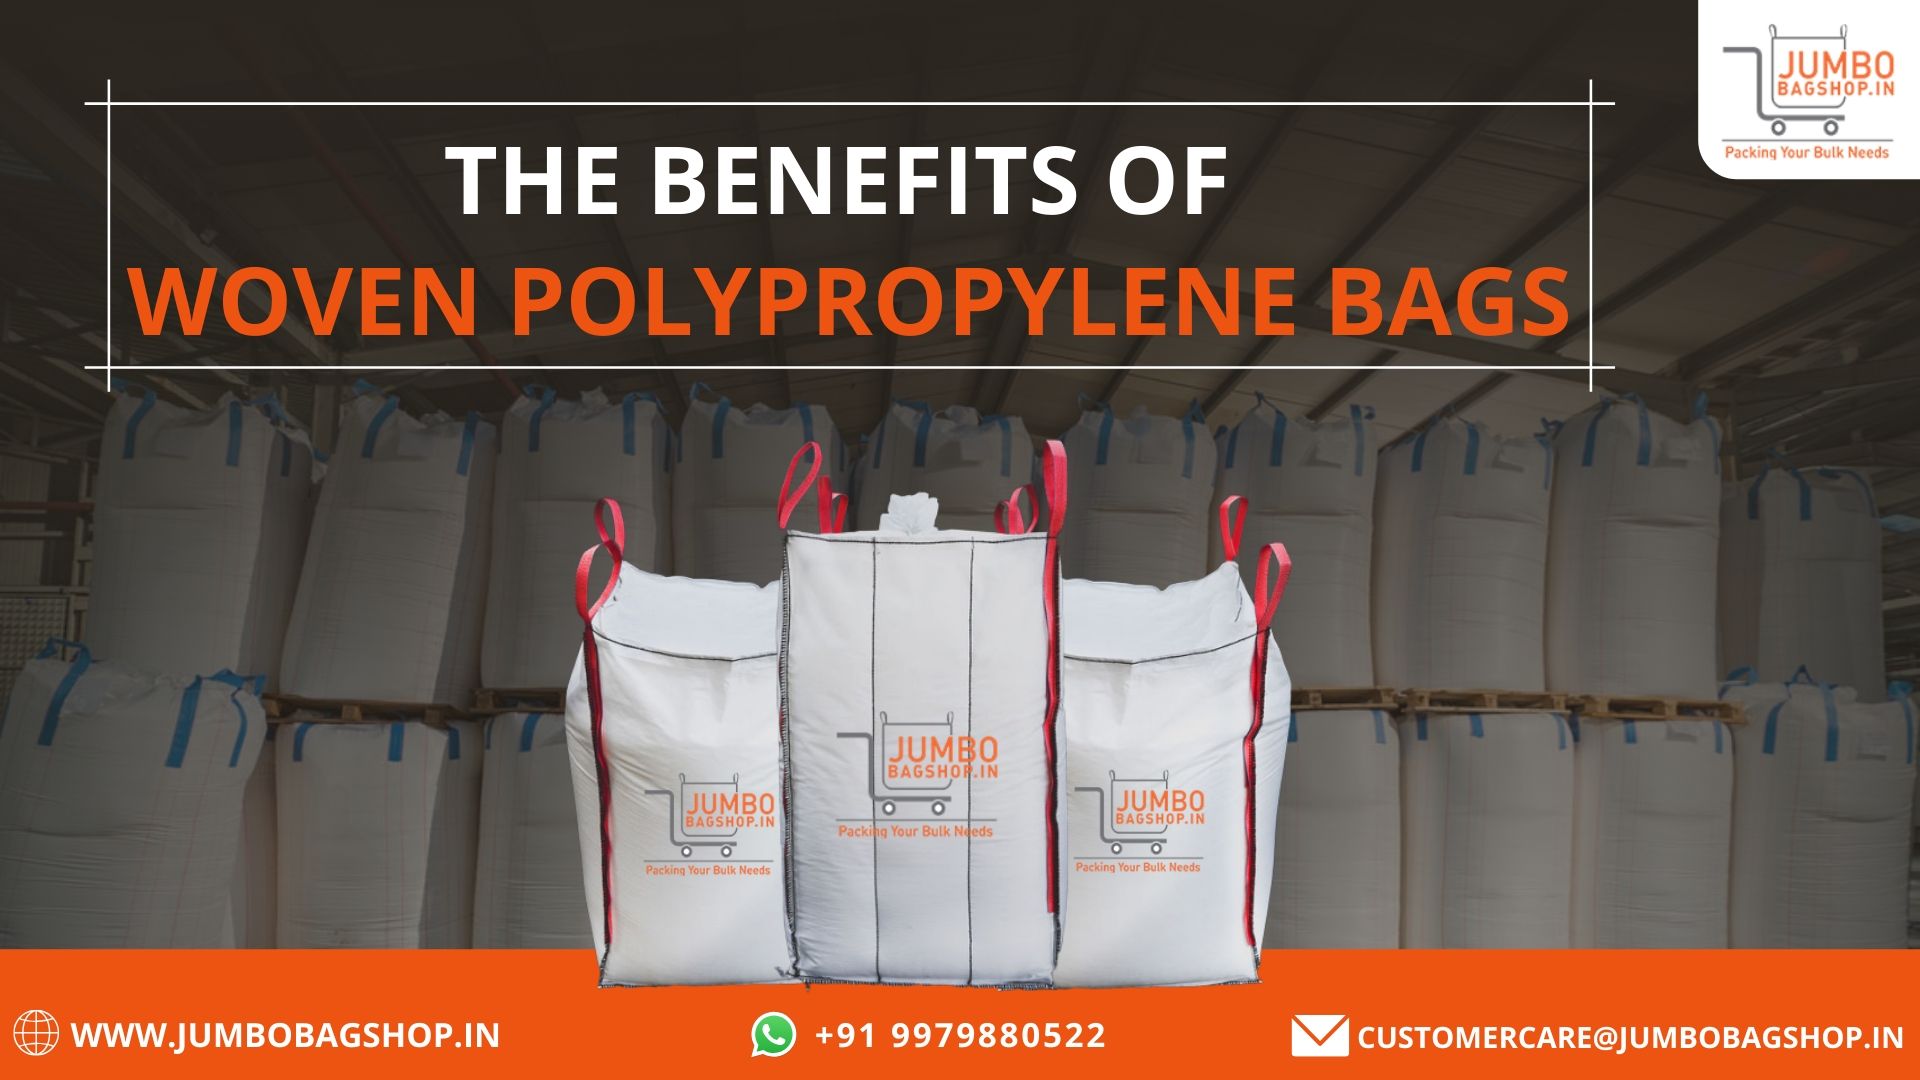 The Benefits of Woven Polypropylene Bags